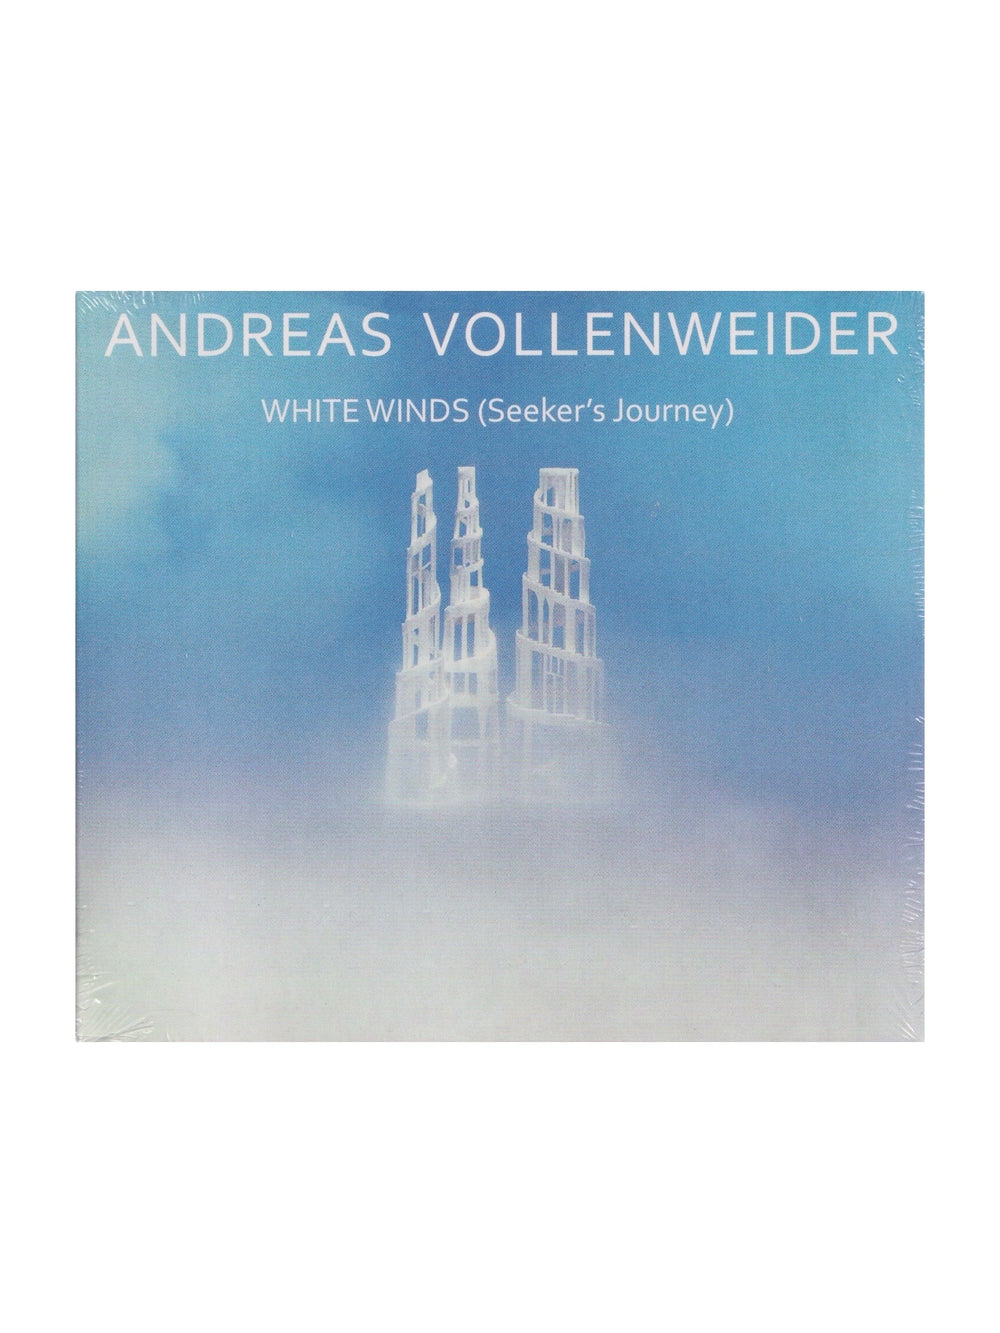 Andreas Vollenweider White Winds CD Album Brand New Sealed Lovesexy Prince